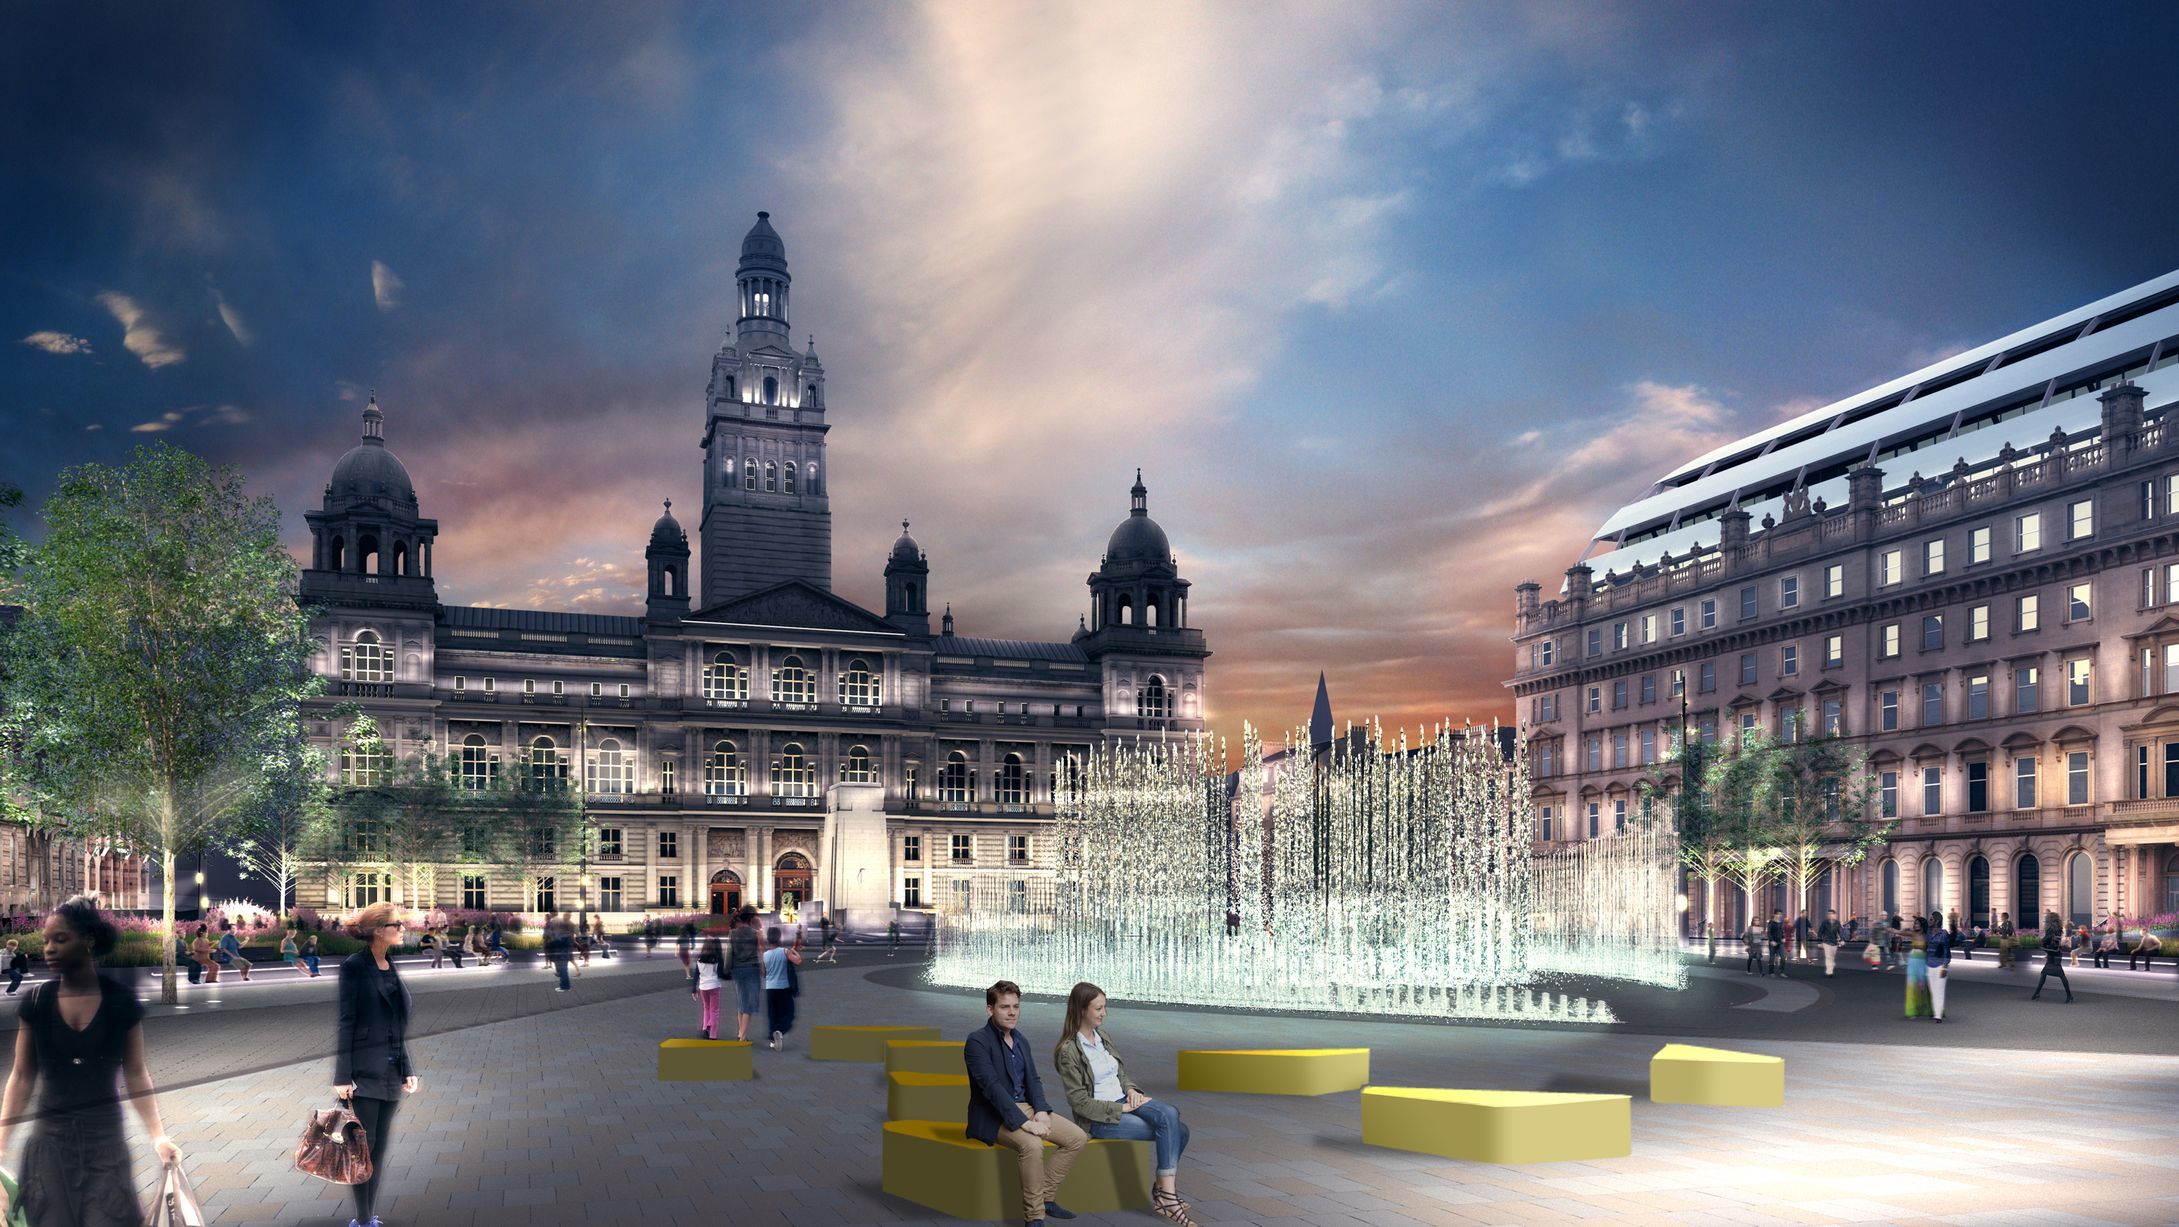 George Square revamp should look at traffic free Glasgow city centre